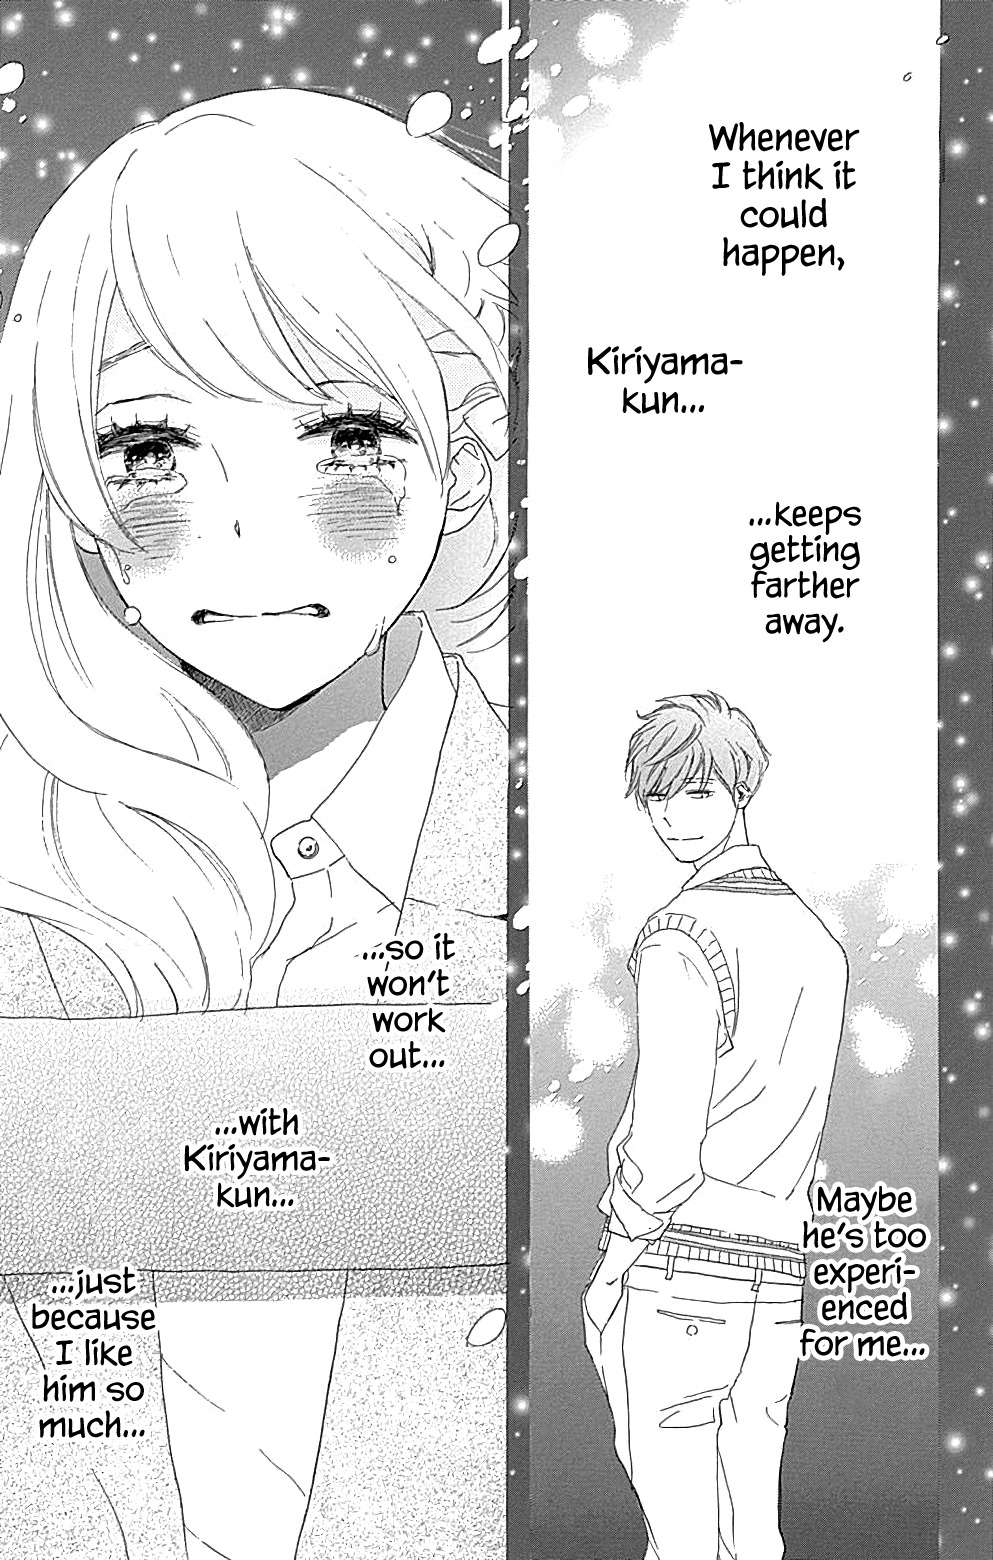 Where's My Lovely Sweetheart? Vol. 4 Ch. 13